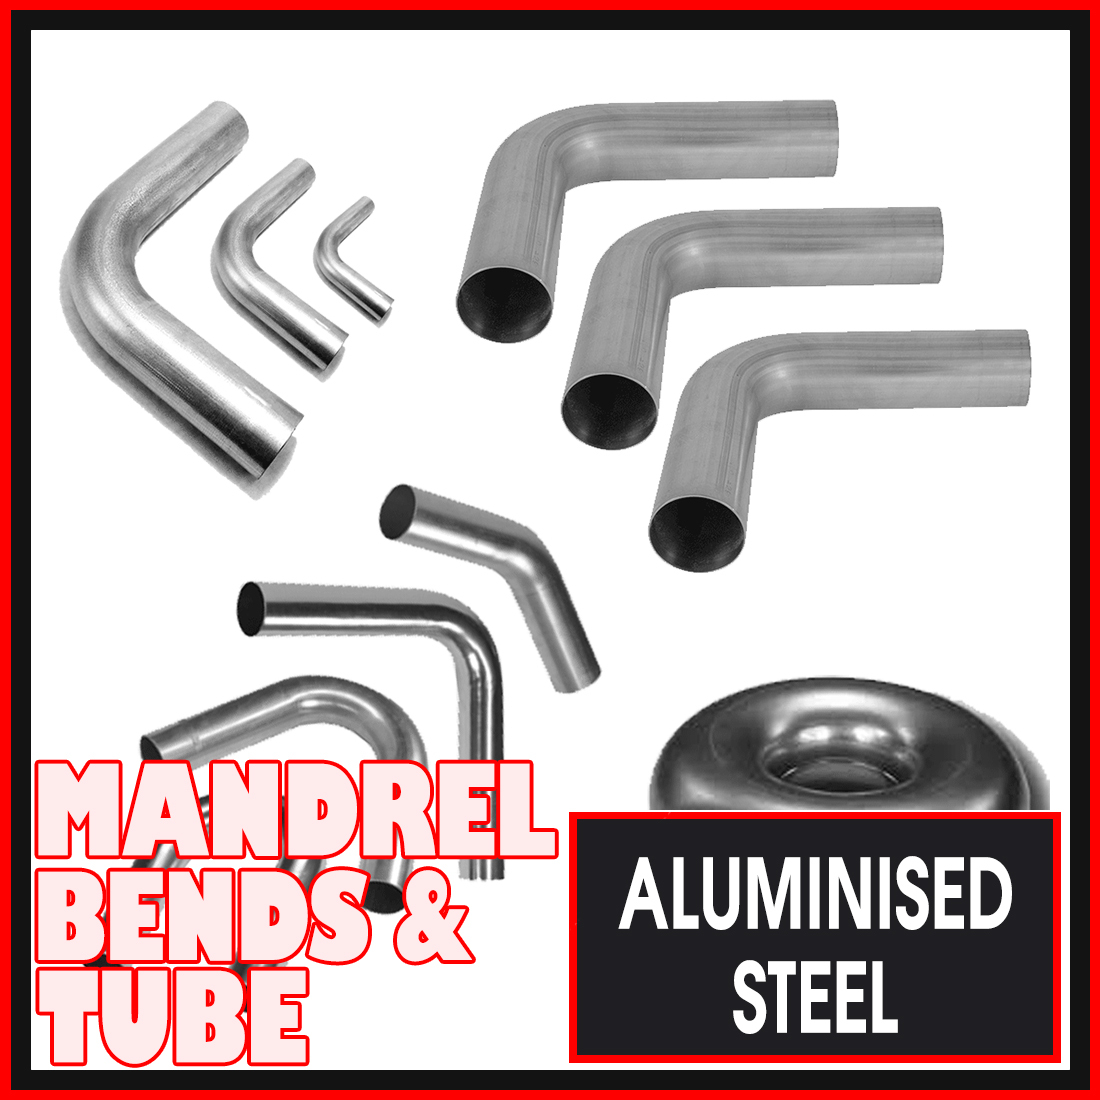 1 3/4" Aluminised Mild Steel Mandrel Bends and Exhaust Pipe image